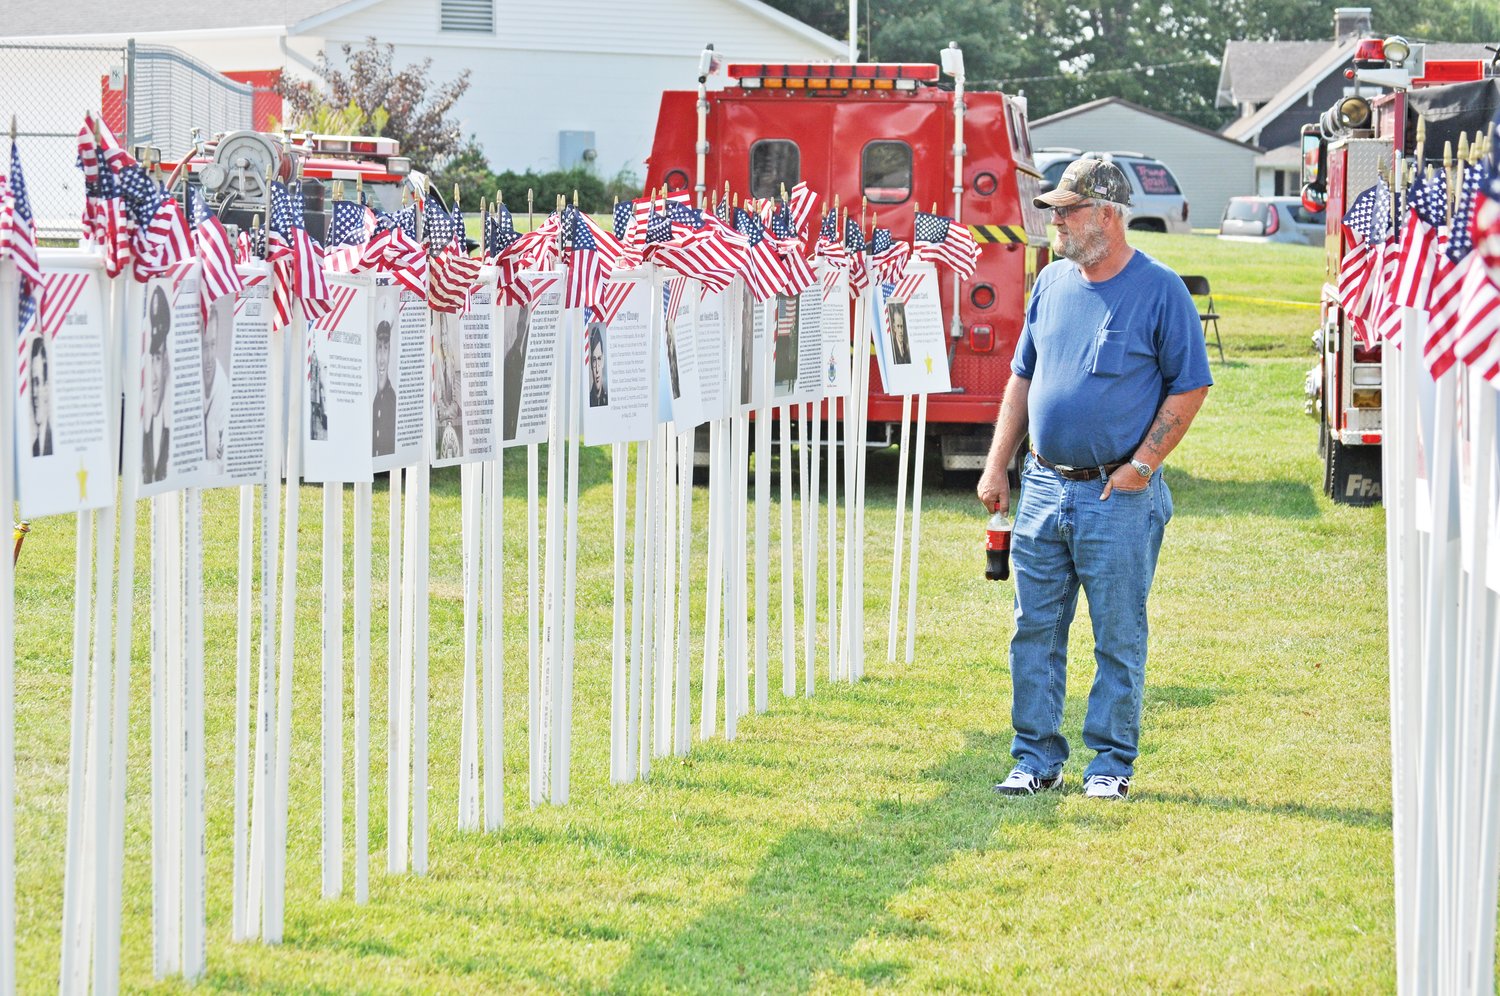 Monty Mitchell looks at a display honoring local veterans at the Waynetown Fish Fry on Saturday.